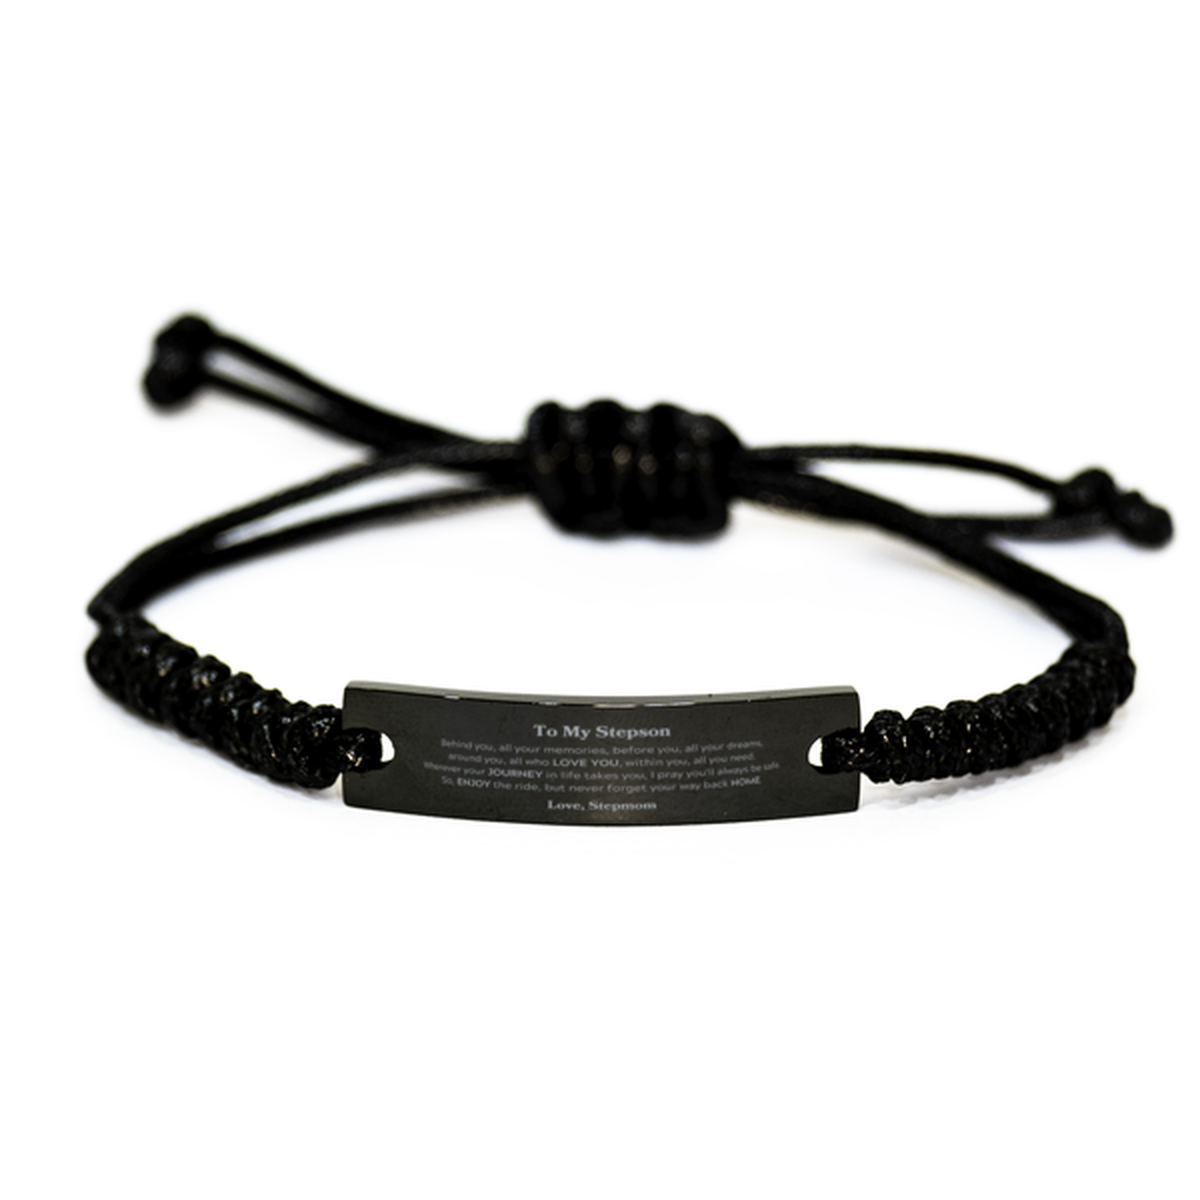 To My Stepson Graduation Gifts from Stepmom, Stepson Black Rope Bracelet Christmas Birthday Gifts for Stepson Behind you, all your memories, before you, all your dreams. Love, Stepmom